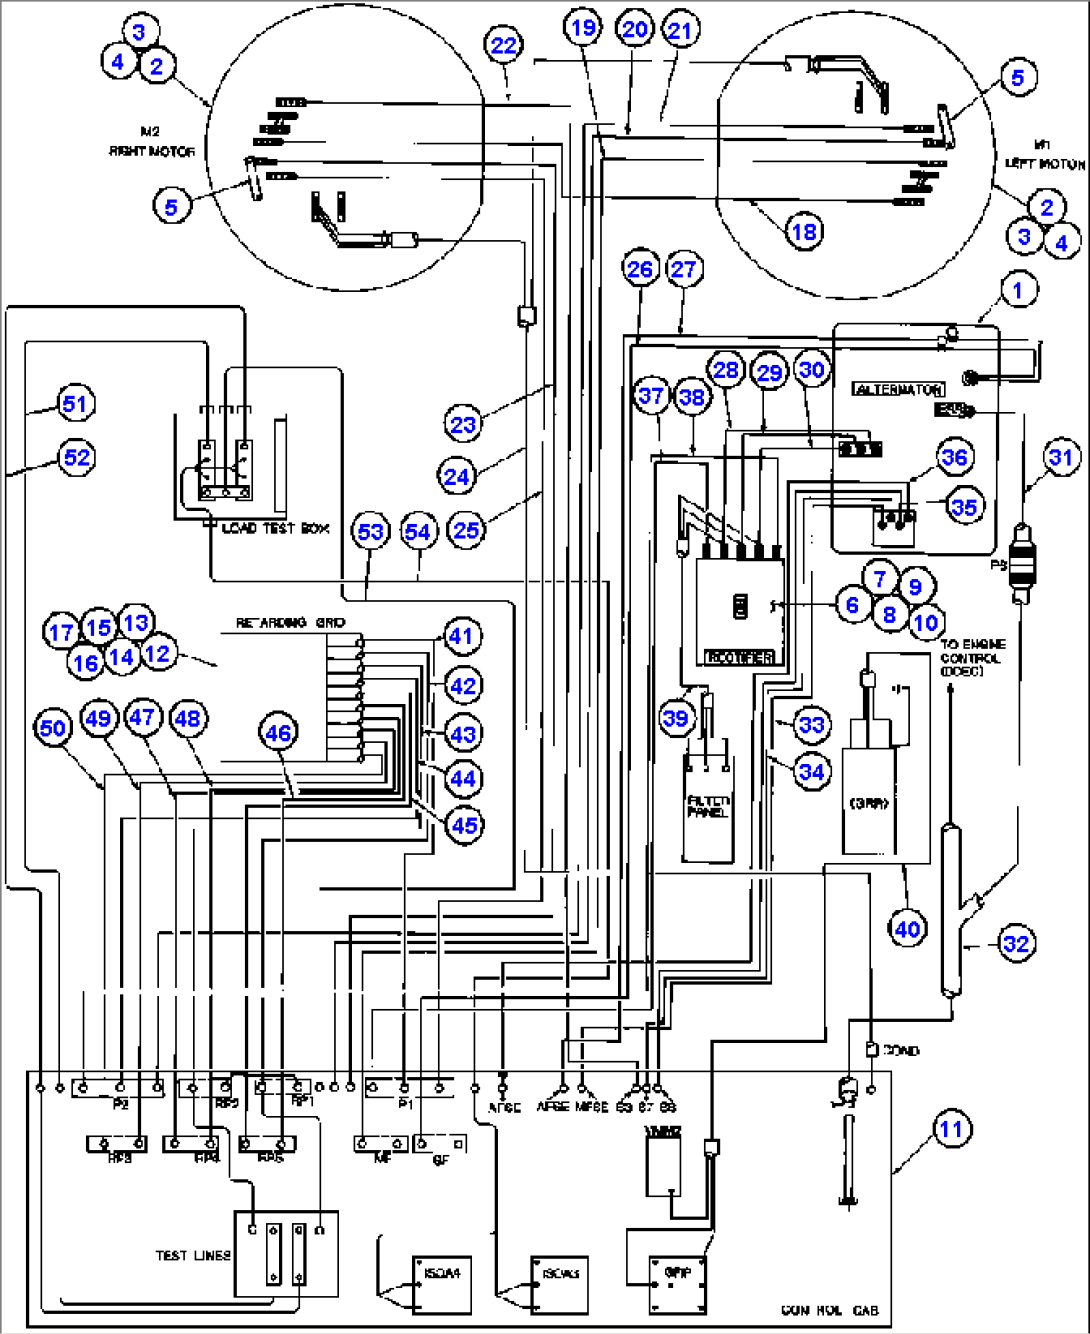 ELECTRIC POWER COMPONENTS WIRING